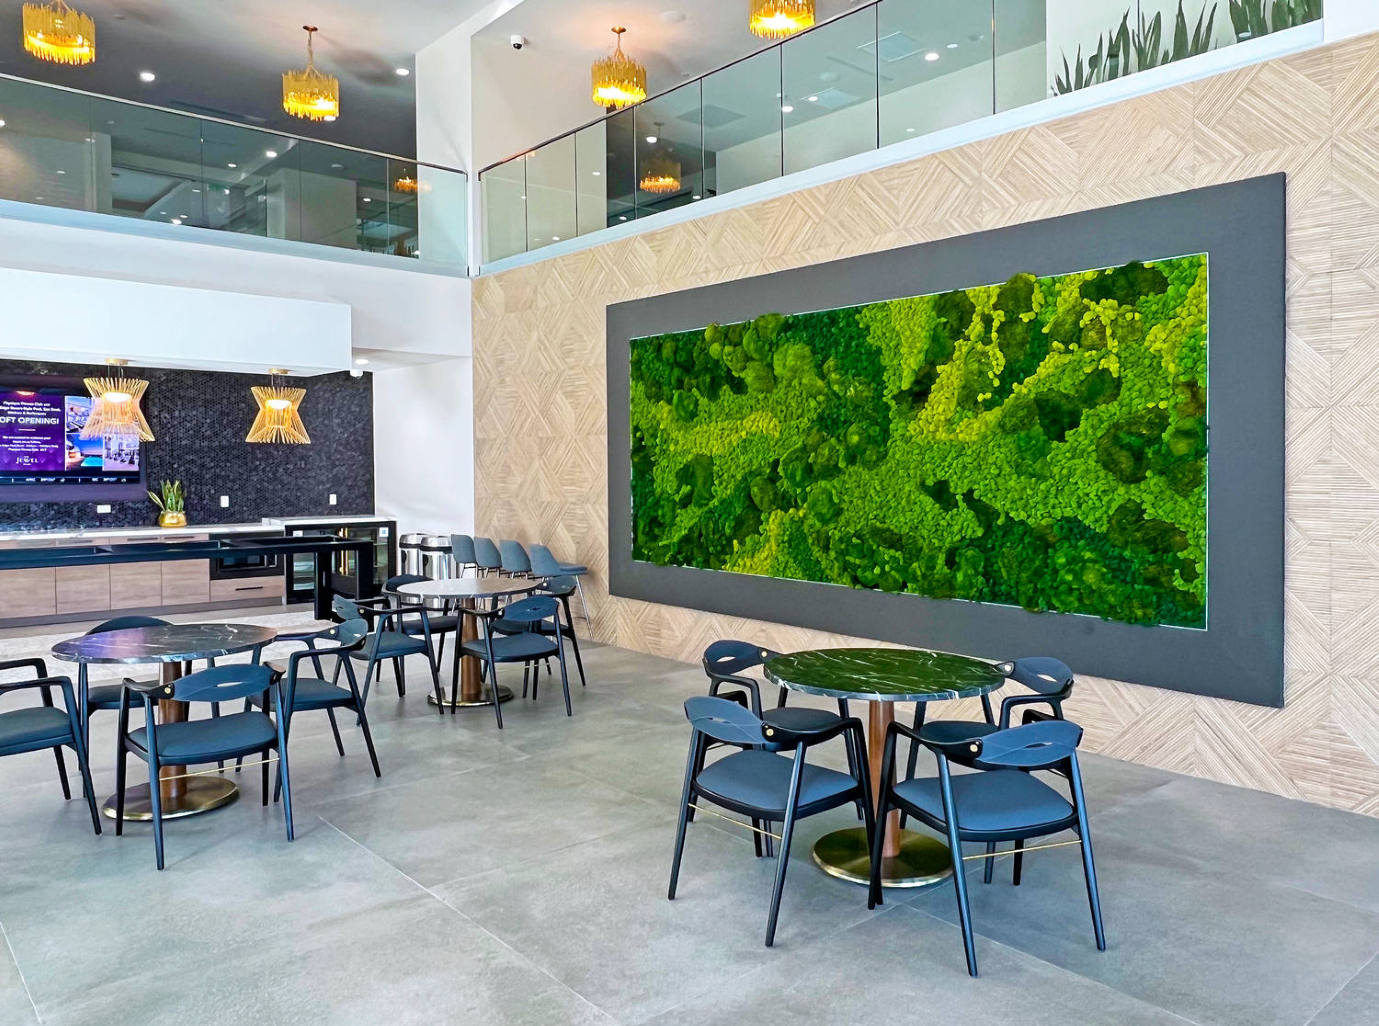 Moss Wall in Commercial space - 4 Reasons Why your Business Needs a Moss Wall